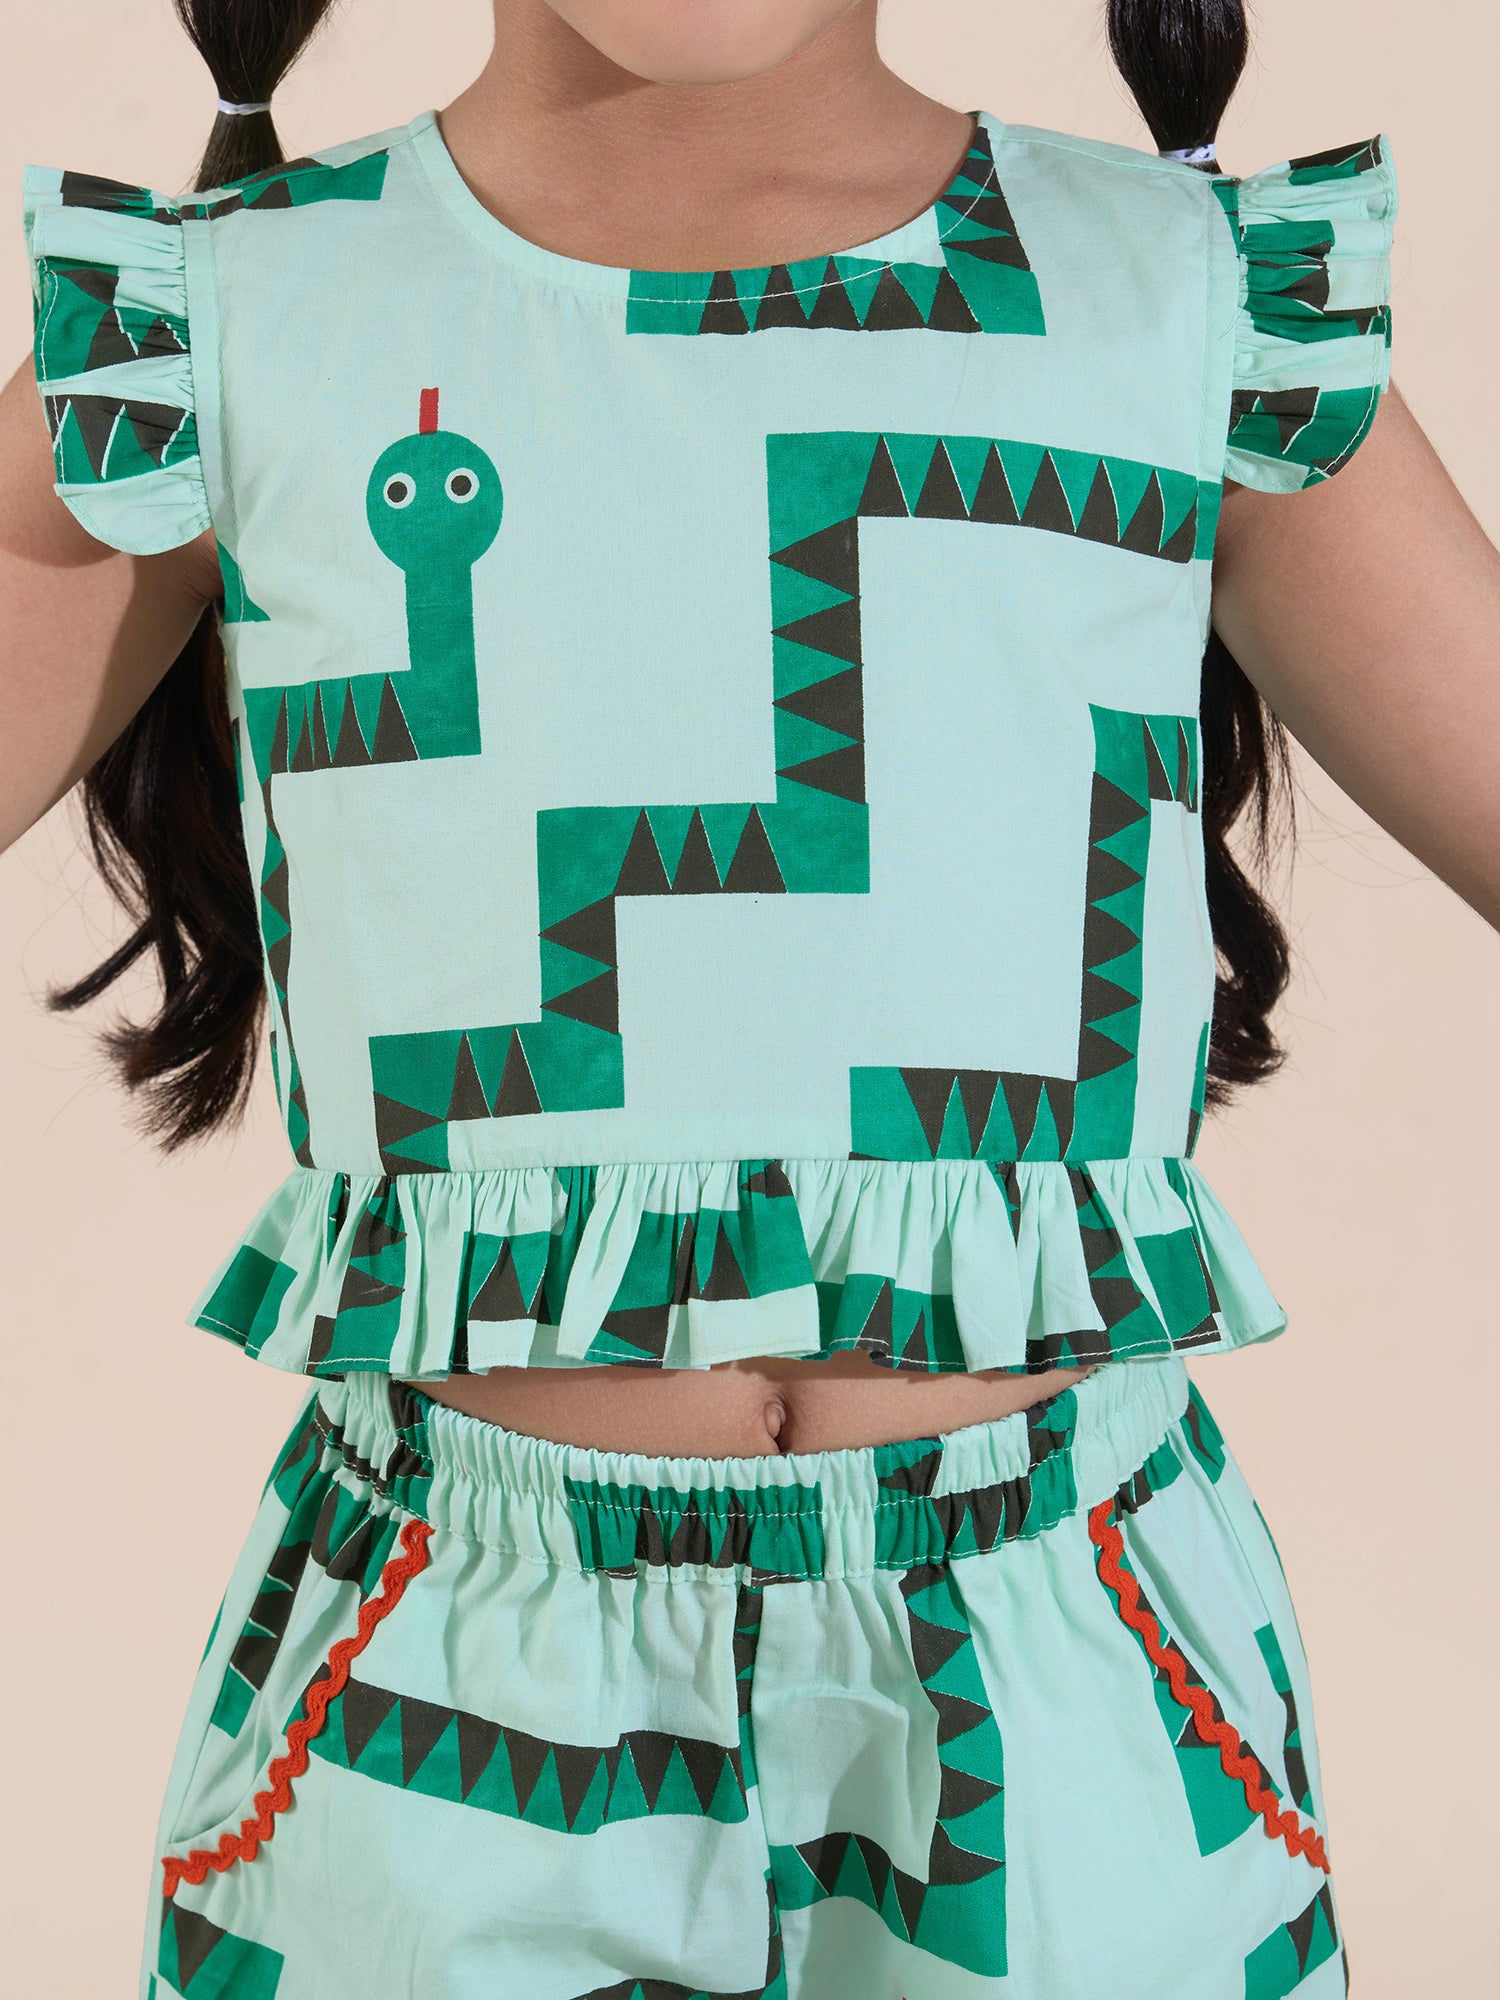 Snakes And Ladders Girls Green Table Print Top And Shorts Sets From Siblings Collection - Lil Drama